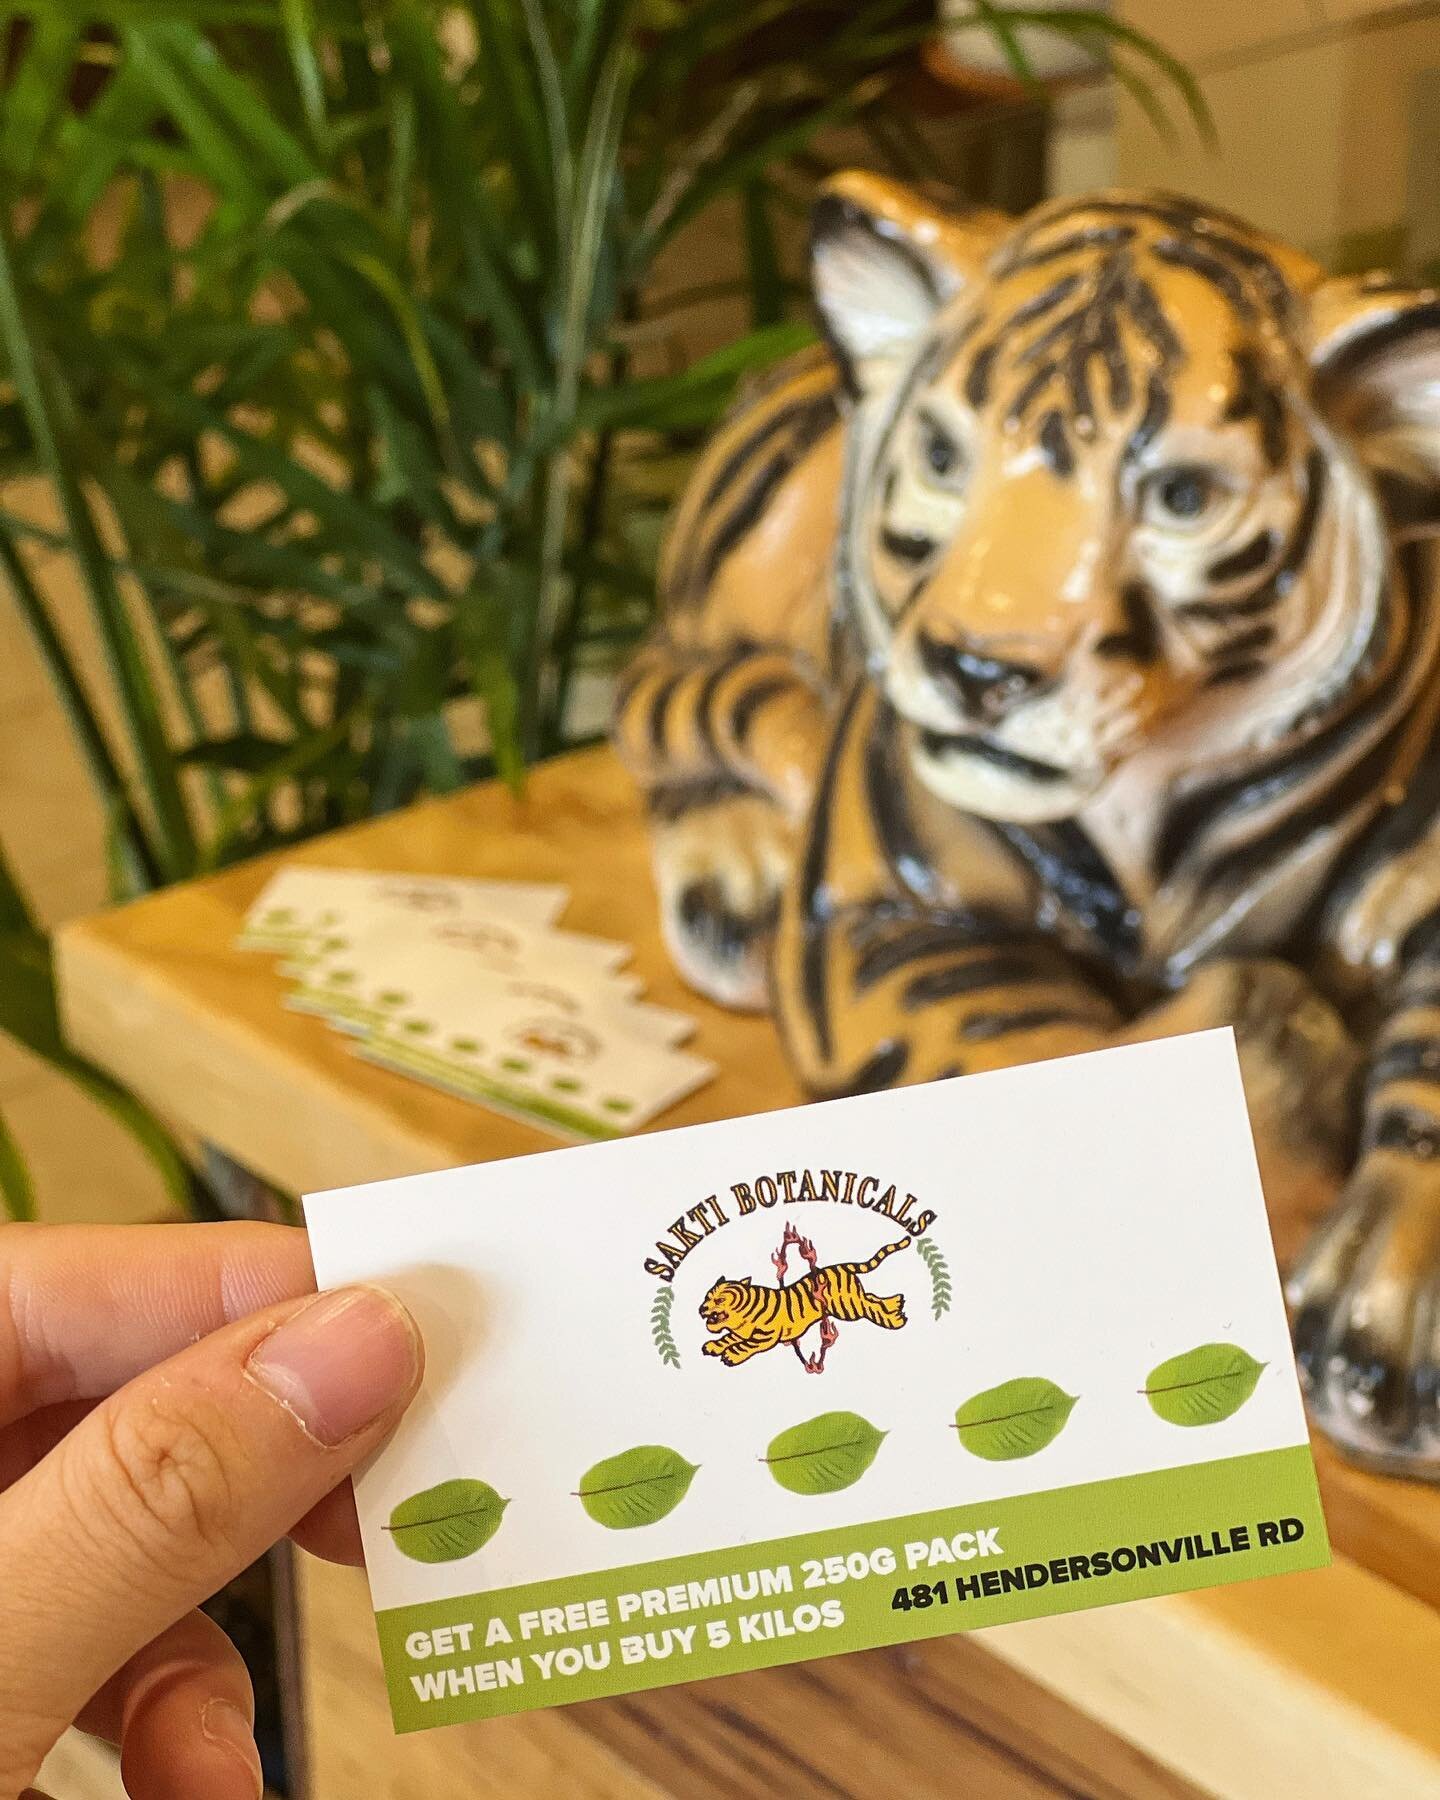 Asheville Locals! 
Did you know at Sakti Botanicals we have loyalty cards? Buy 5 kilos and get a 250g pack free! 

Come by our store at 481 Hendersonville Road and start getting your stamps today! 

We are open Mon-Fri 12-5 and Saturdays 10-6 🌿

Fri